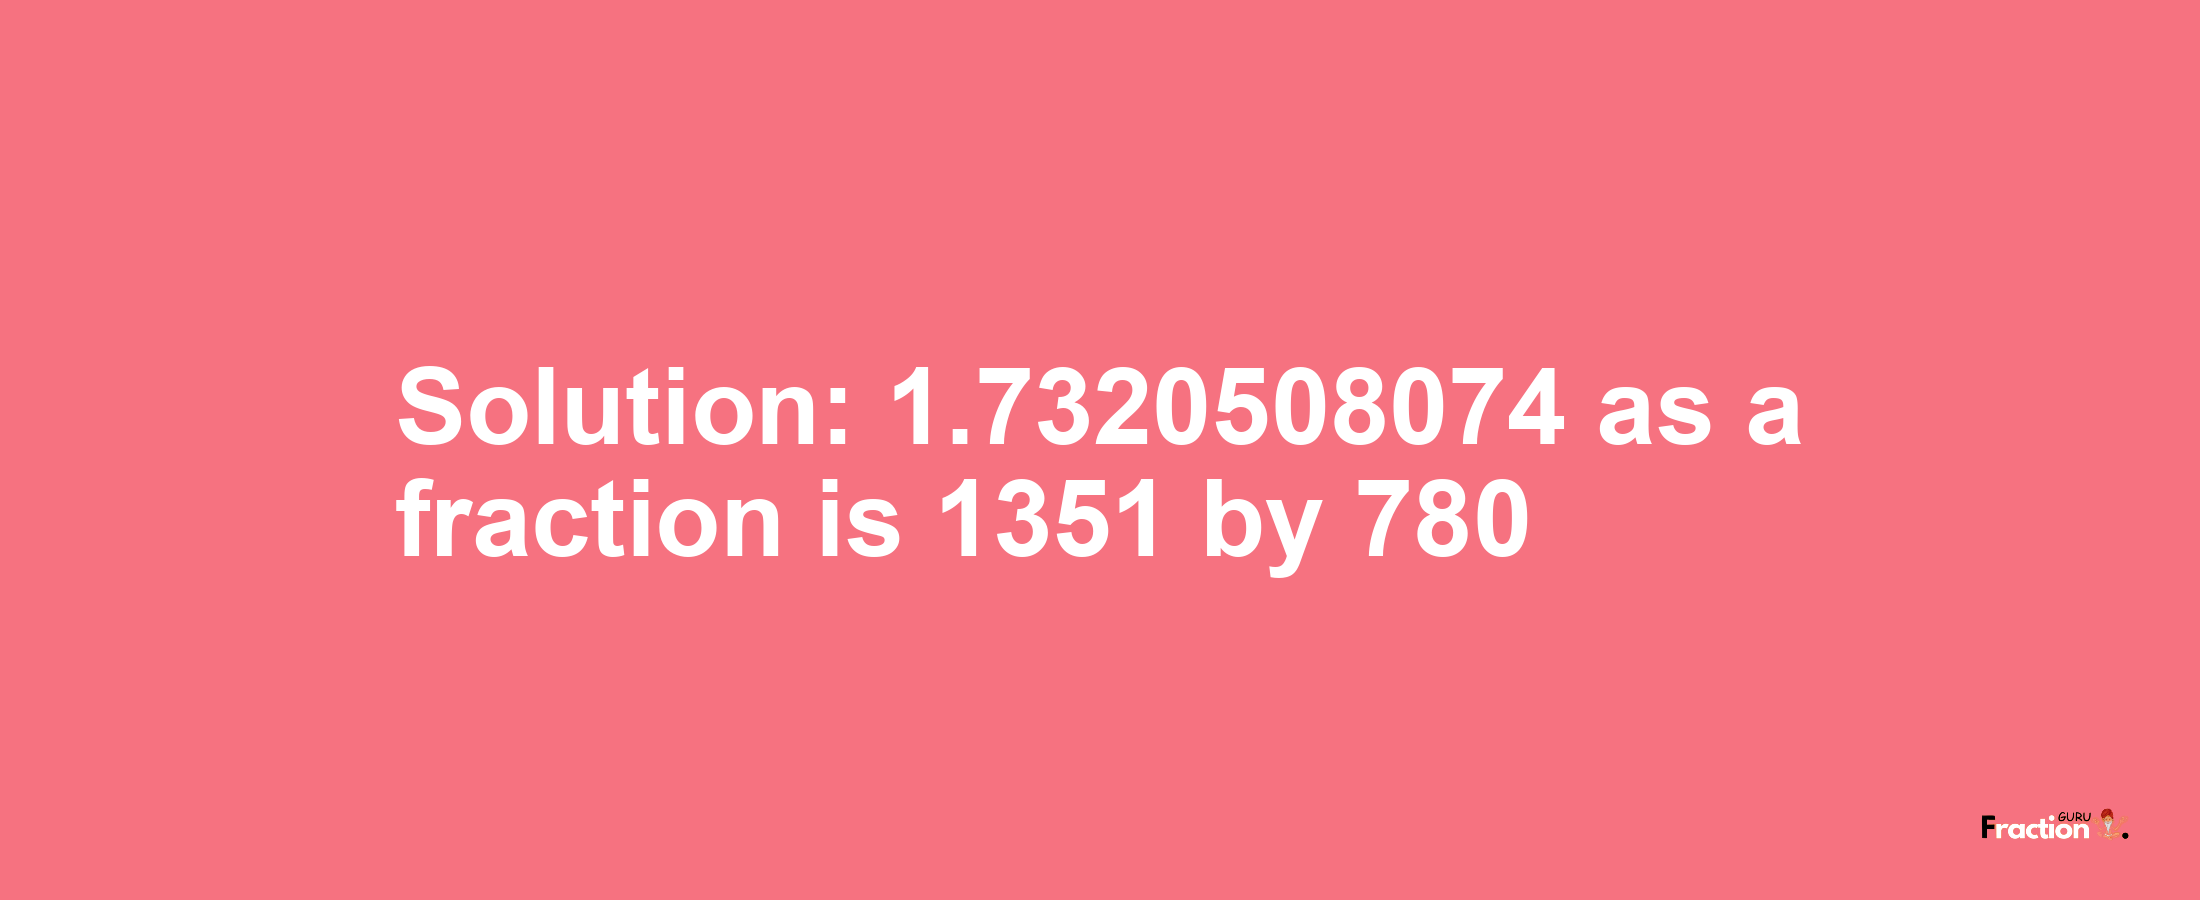 Solution:1.7320508074 as a fraction is 1351/780